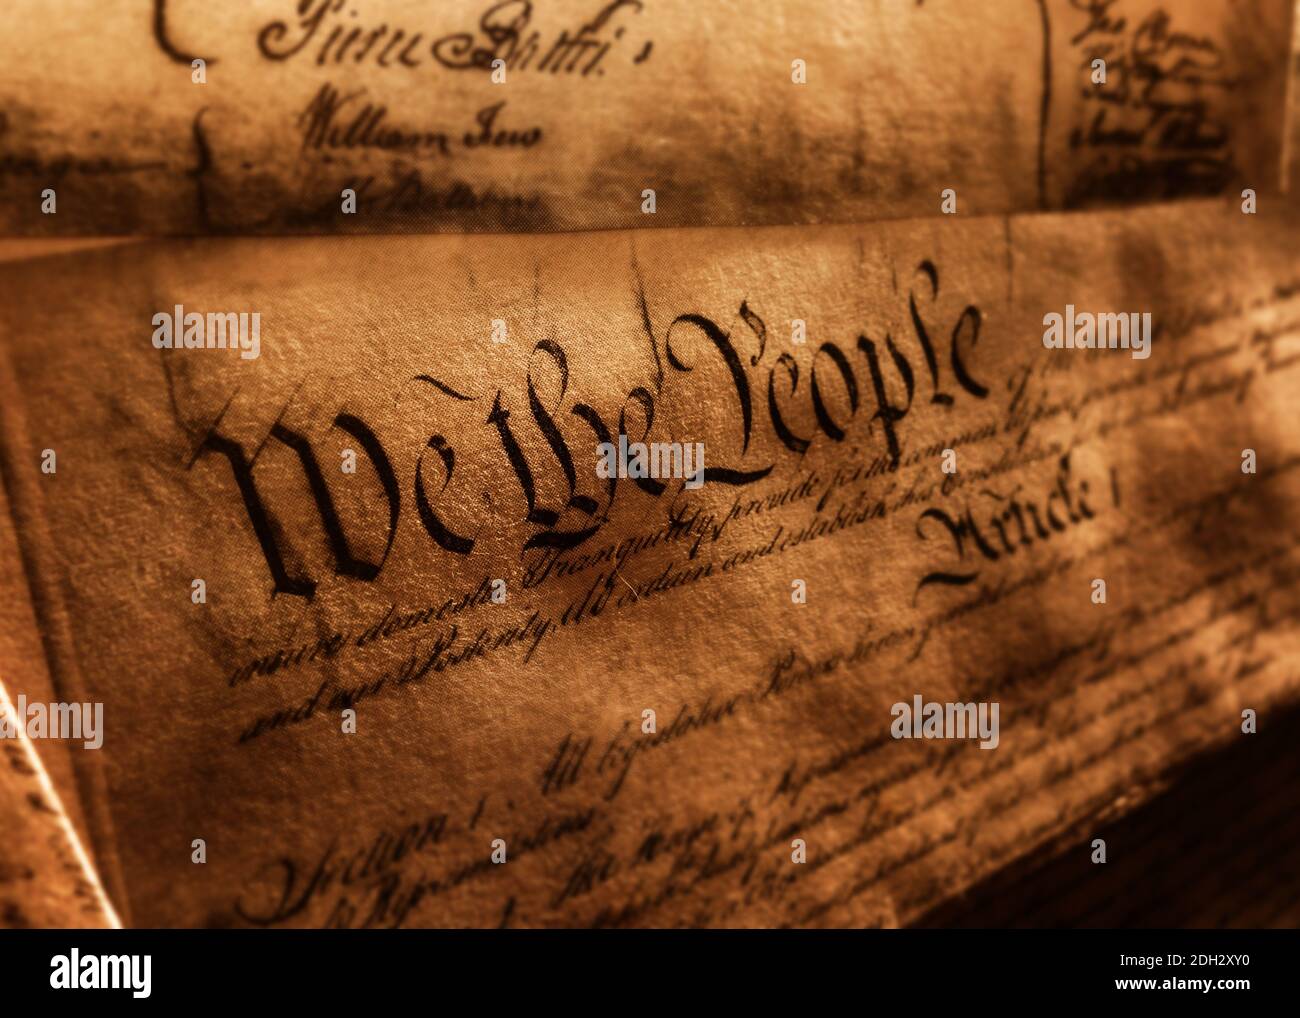 The United States Constitution Stock Photo